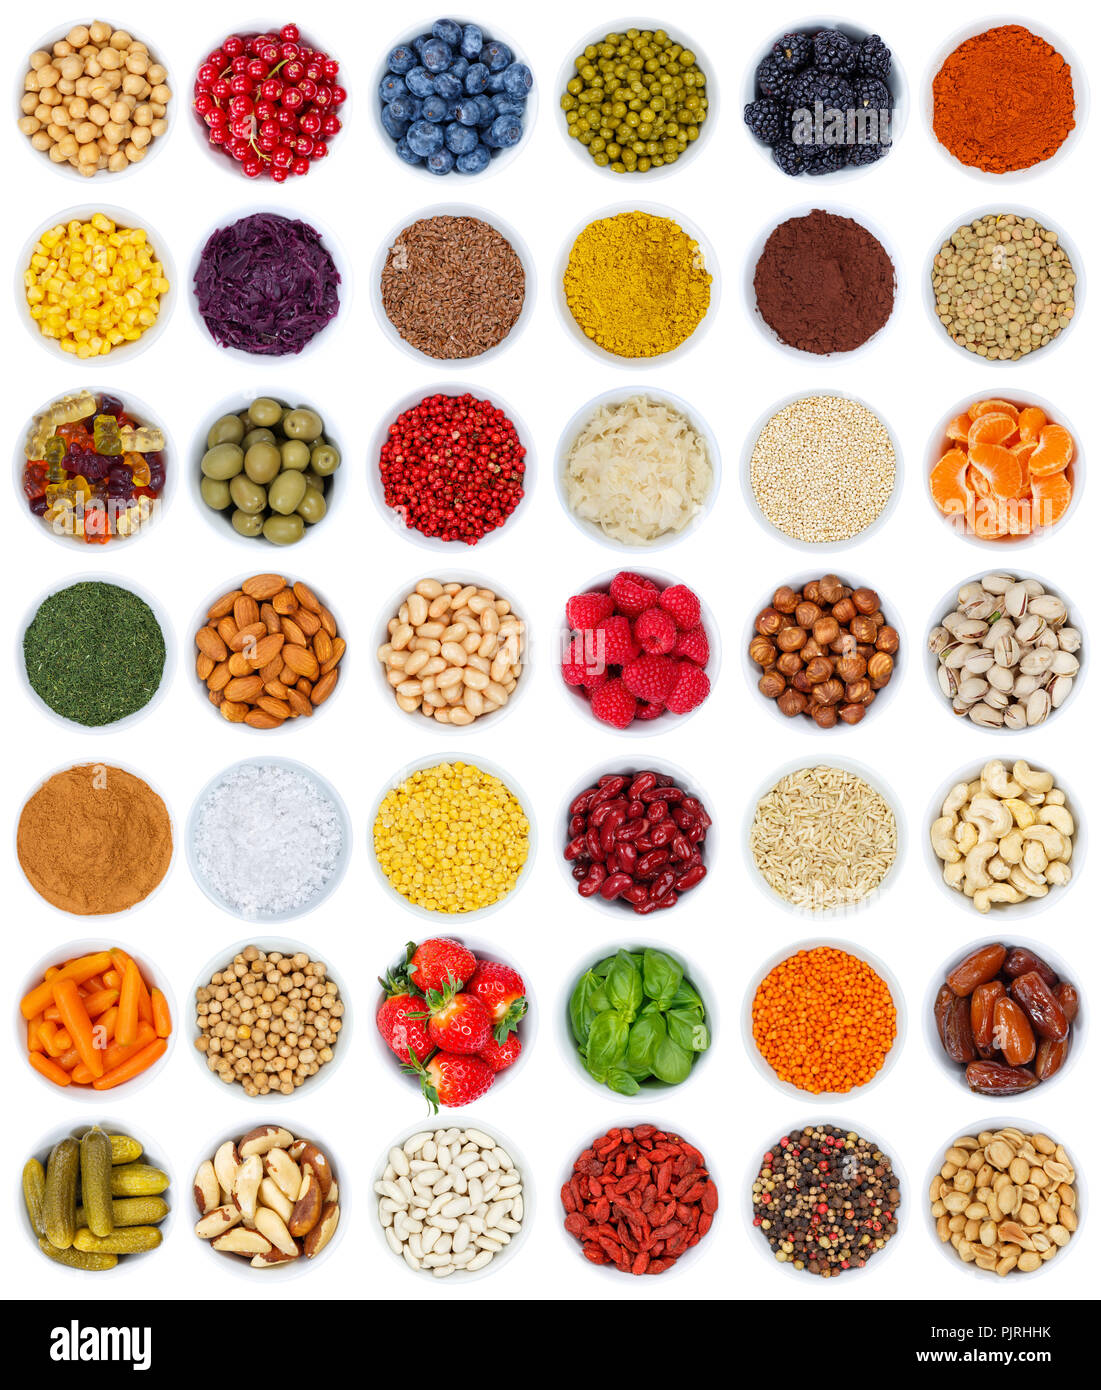 Fruits and vegetables berries spices herbs from above portrait format isolated on a white background Stock Photo